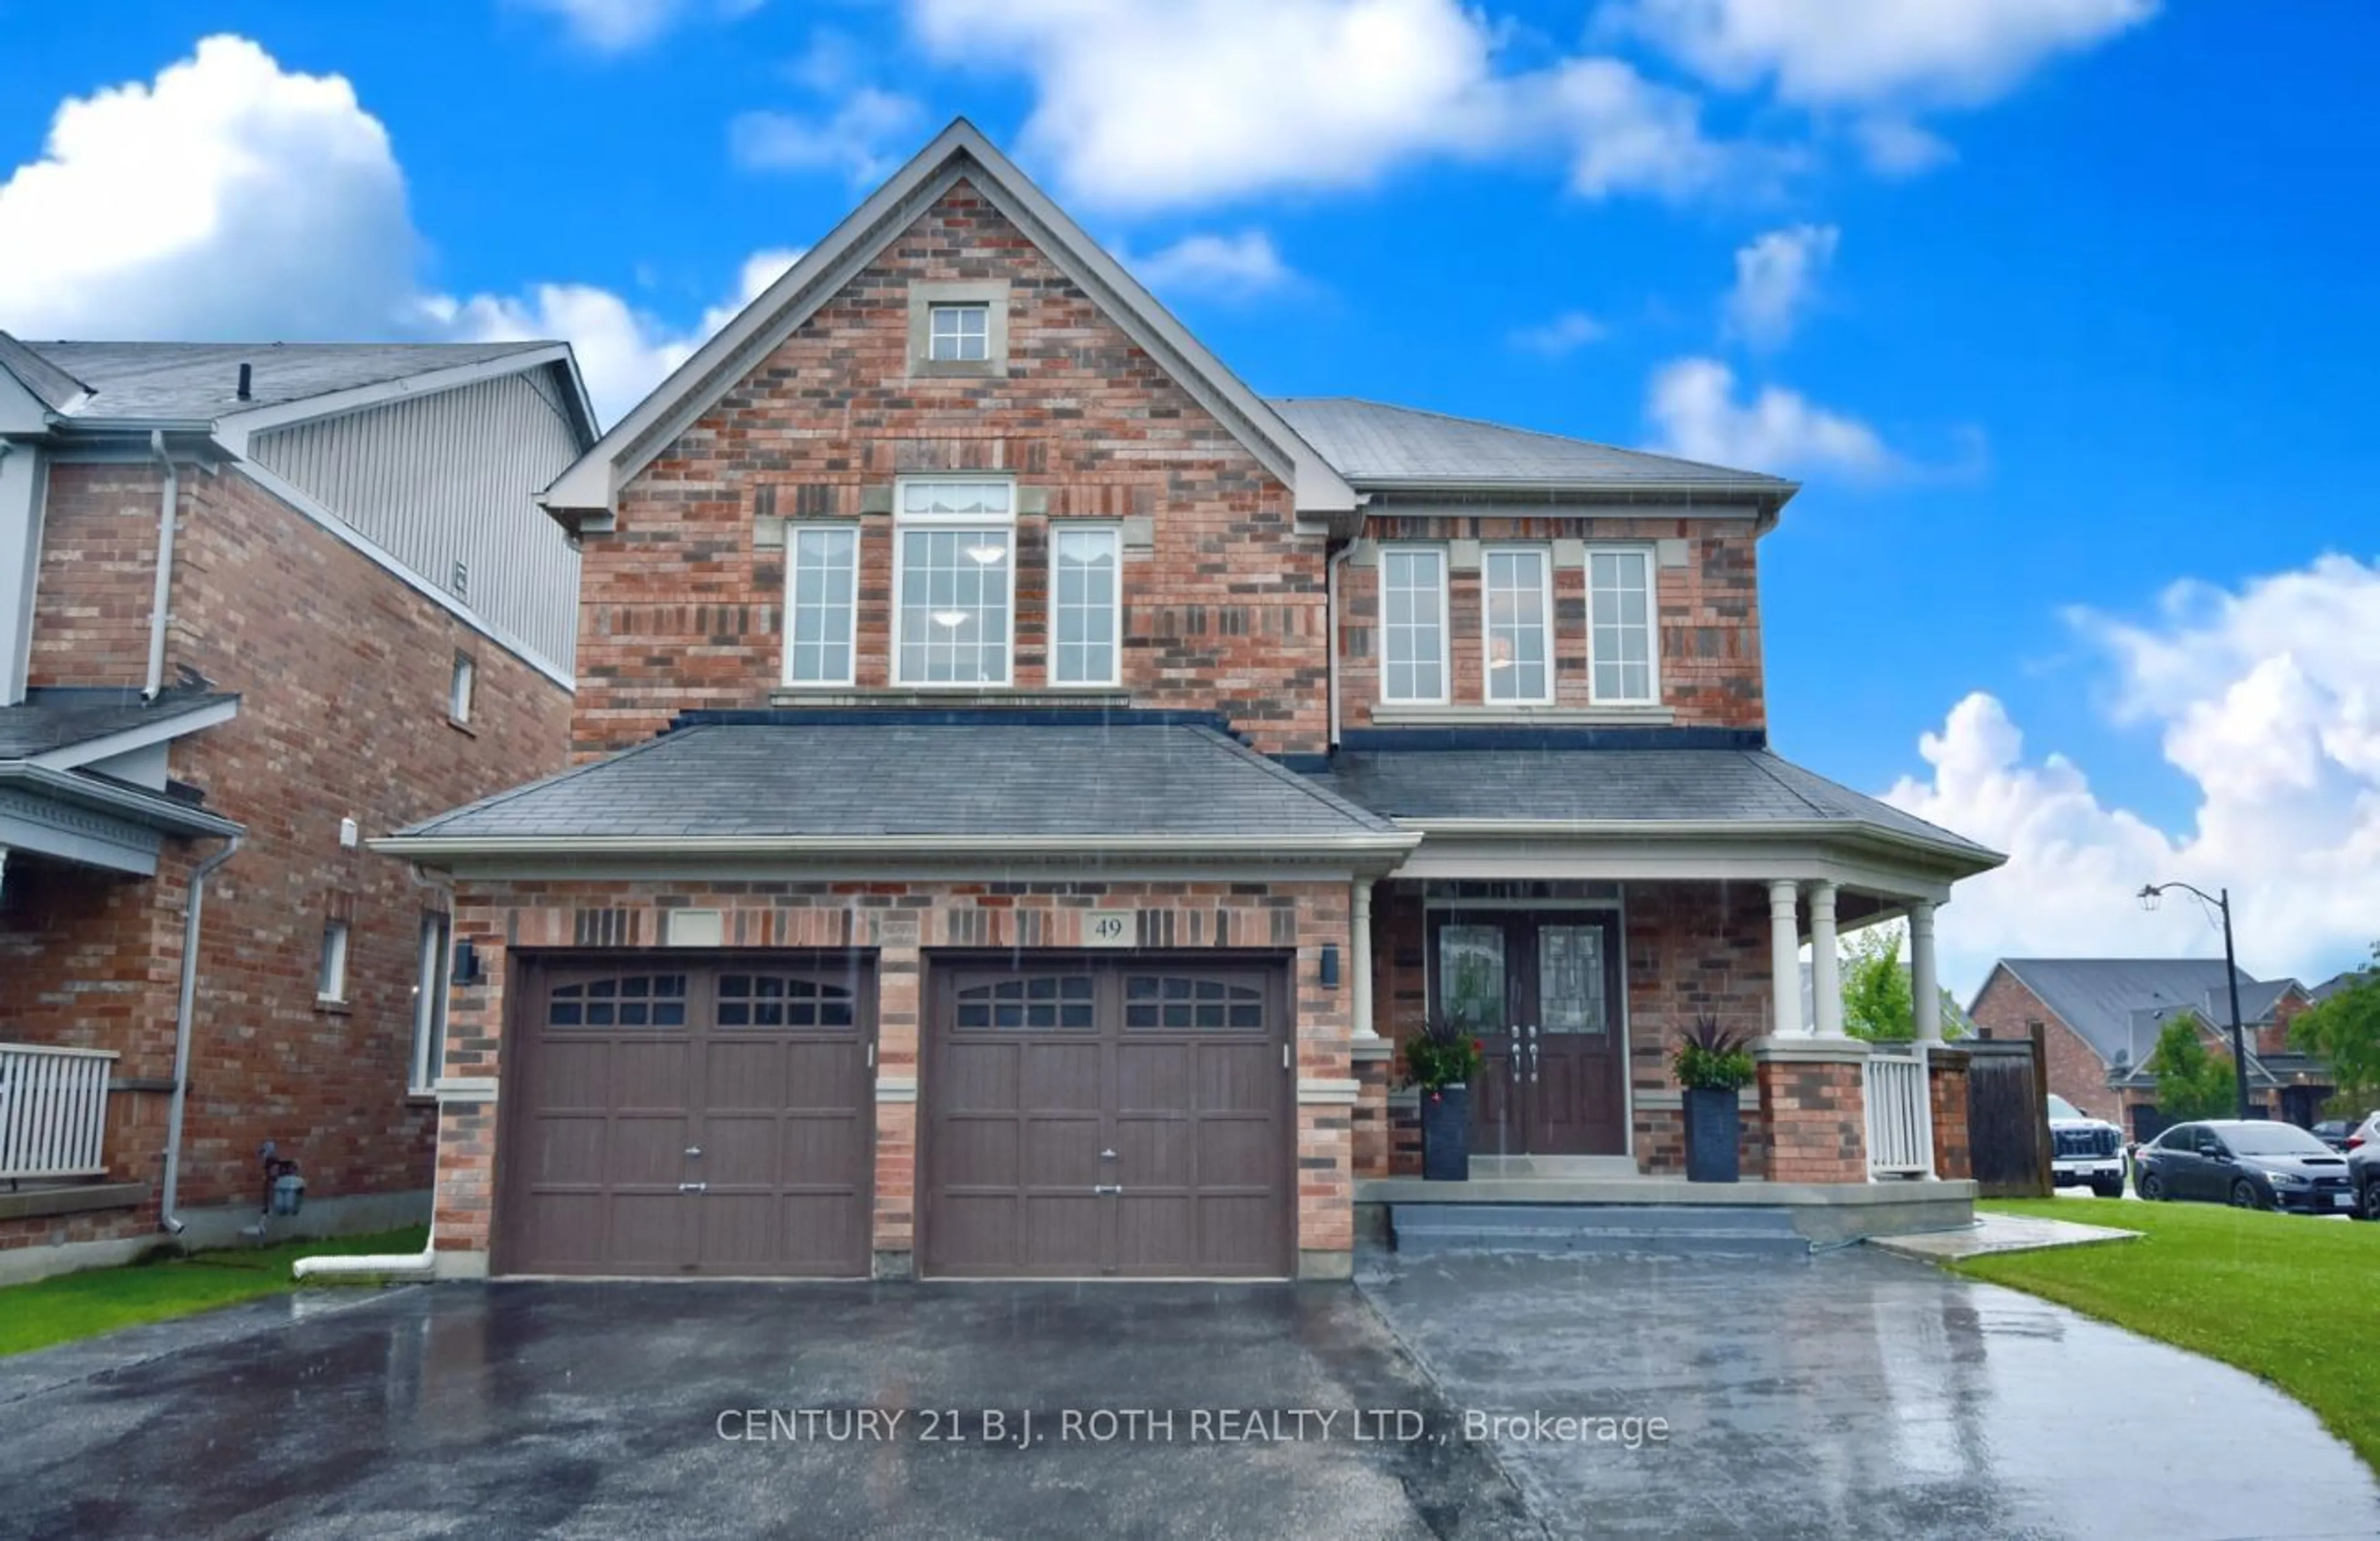 Home with brick exterior material for 49 Corwin Dr, Bradford West Gwillimbury Ontario L3Z 0E4